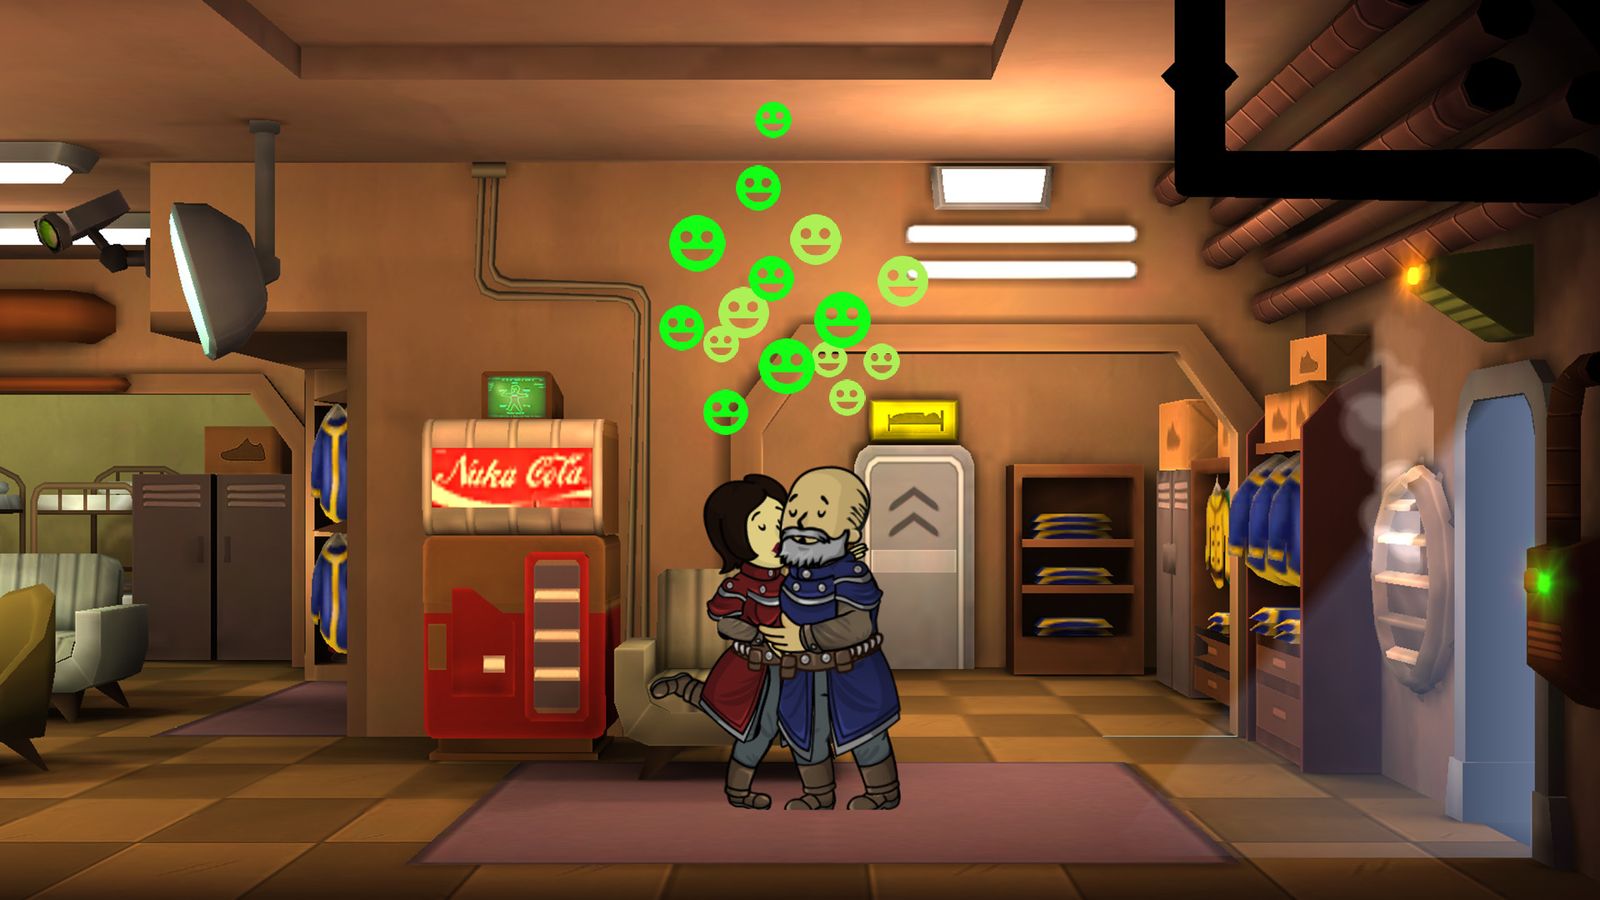 Image of two vault inhabitants hugging in Fallout Shelter.